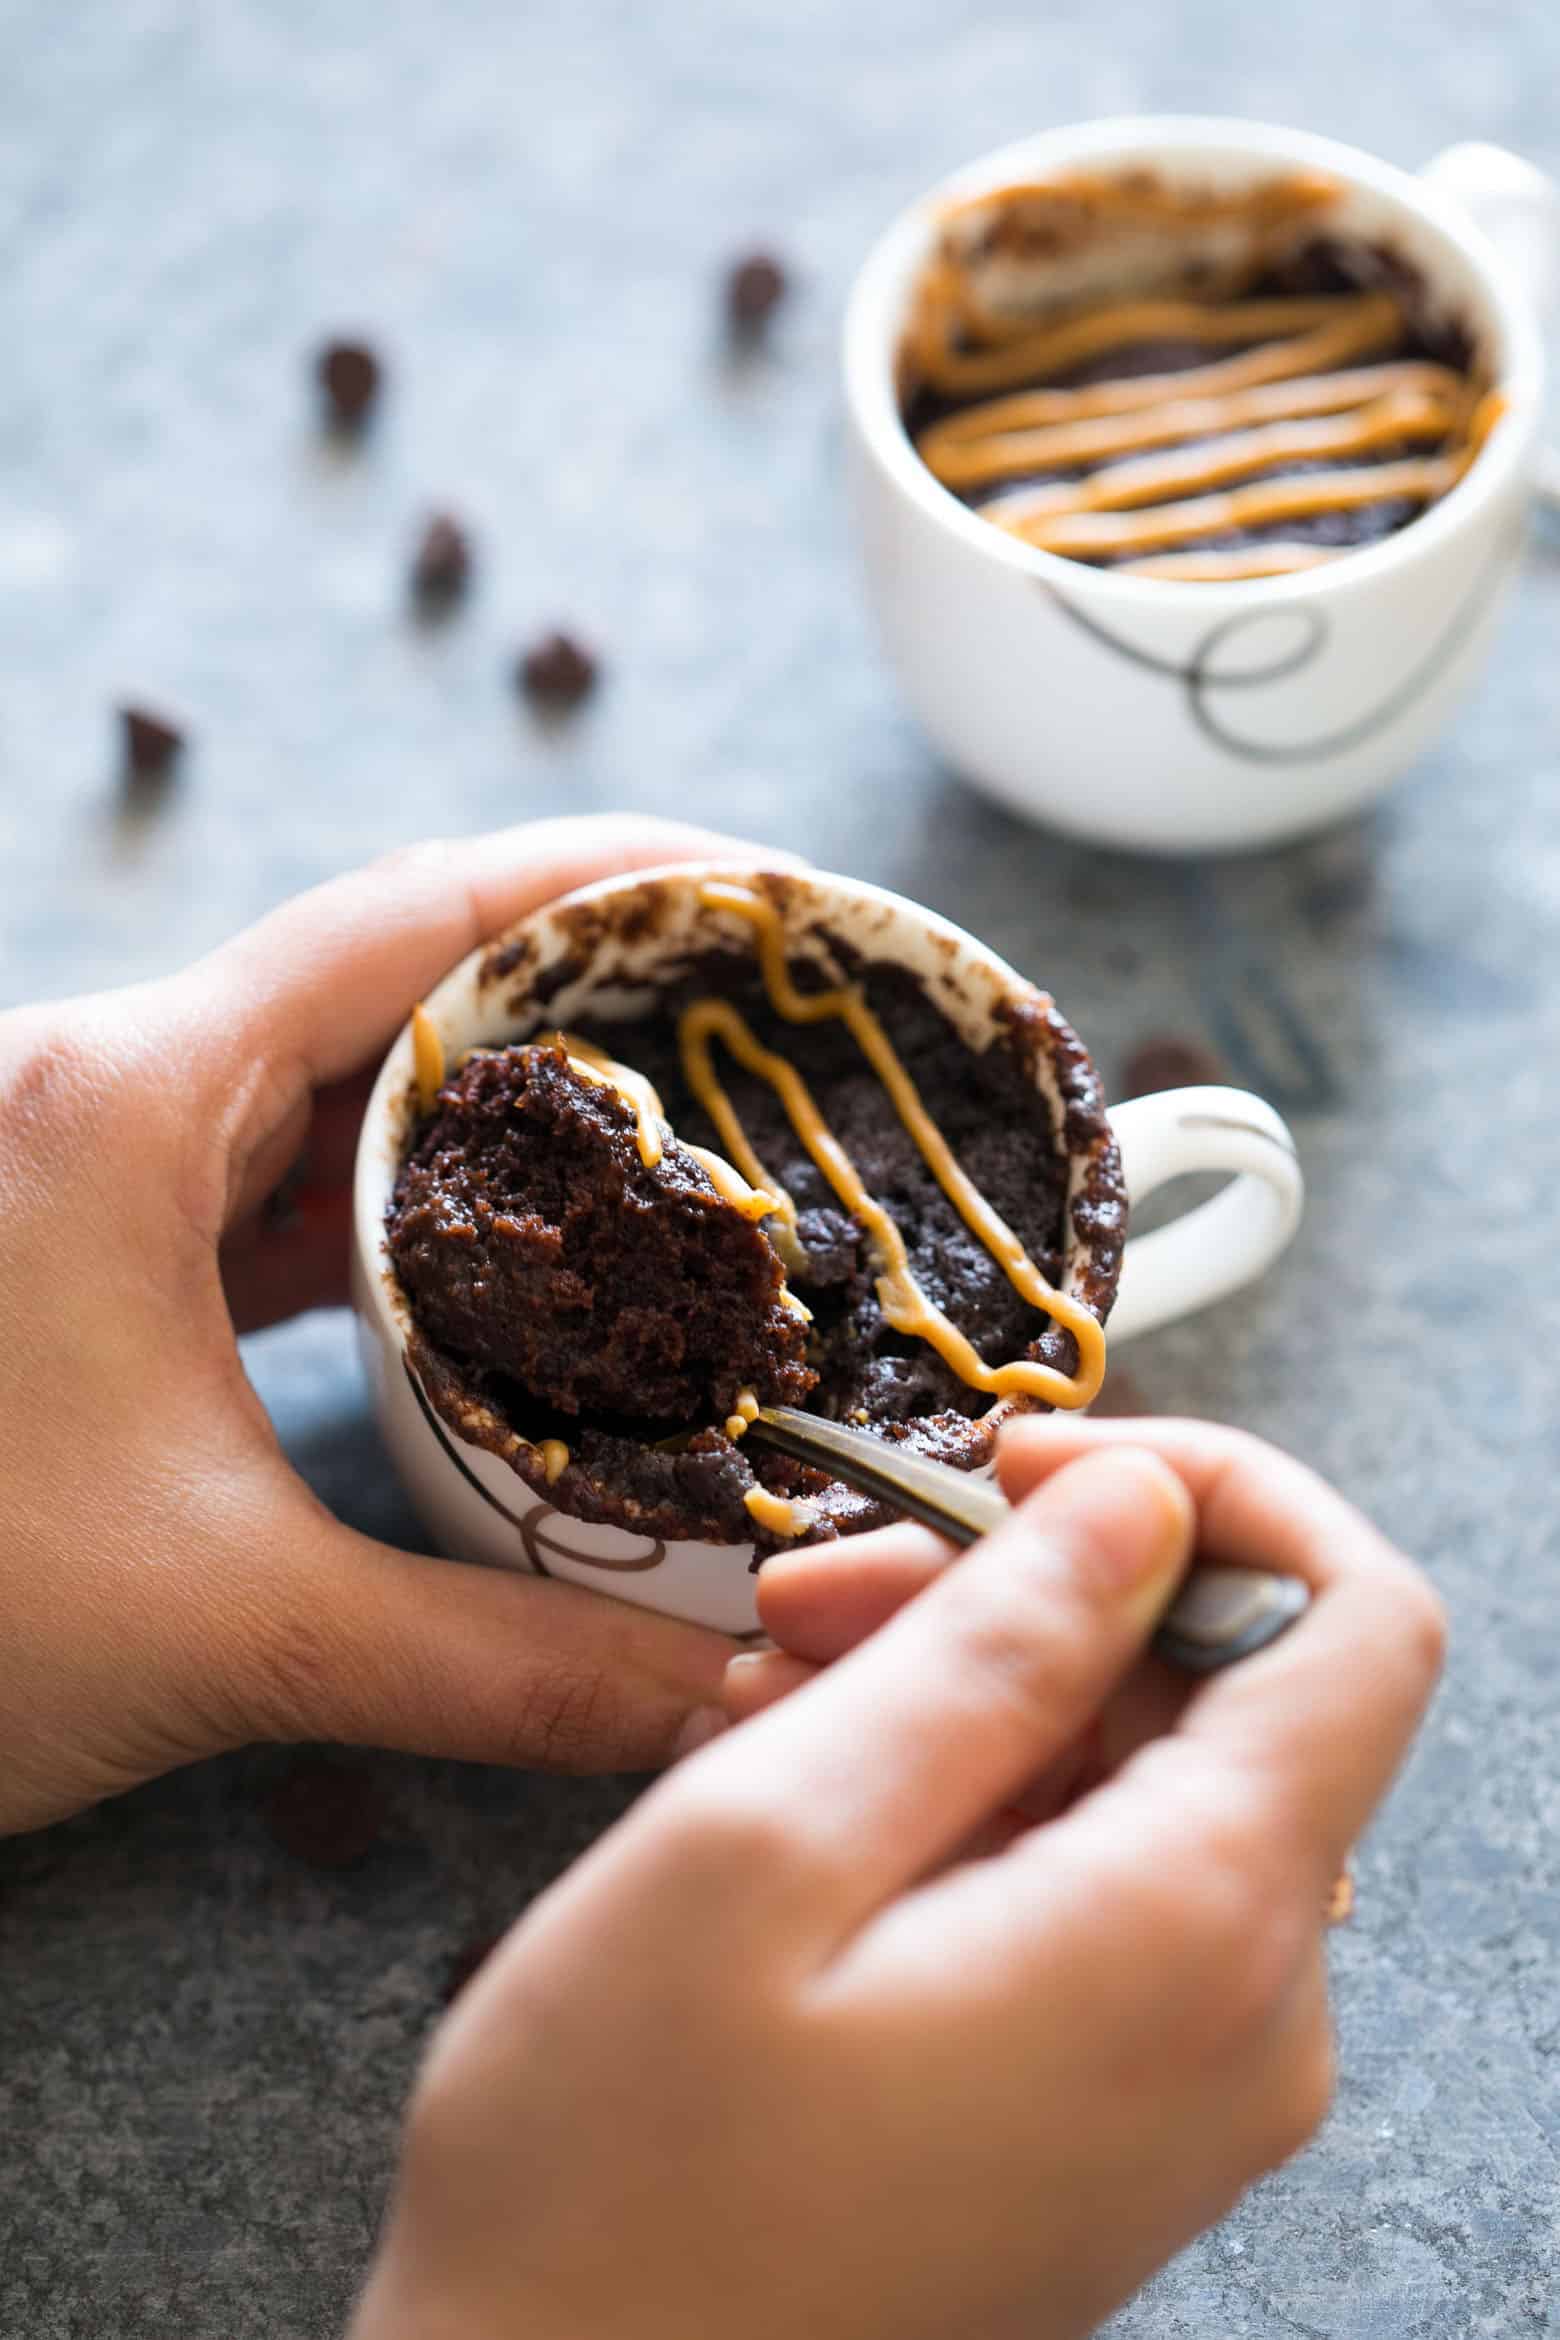 Single serving eggless banana chocolate peanut butter mug cake is the best, gooey and the moistest mug cake recipe you'll try. Ready in under 5 minutes and just needs a microwave!